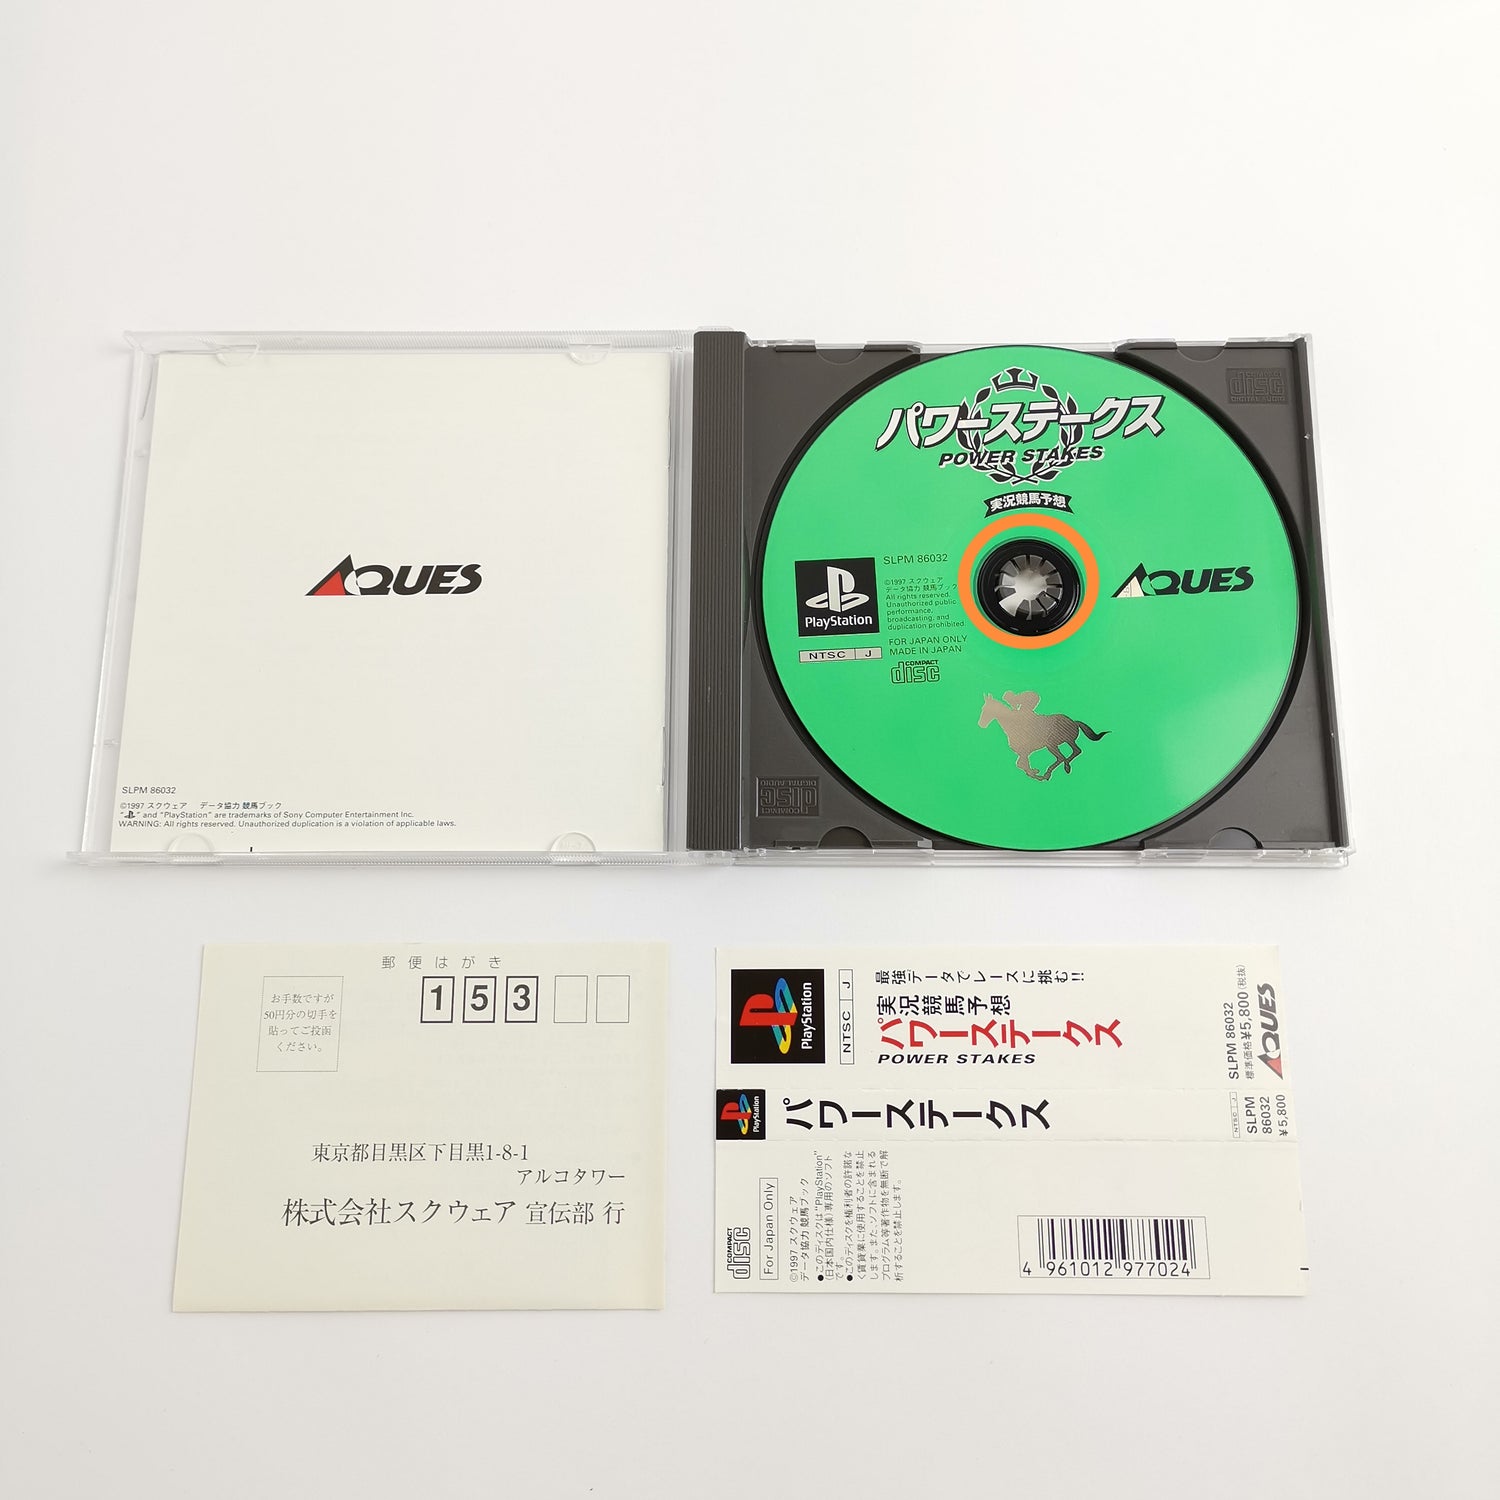 Sony Playstation 1 Game: Power Stakes | PS1 PSX - OVP NTSC-J Japan